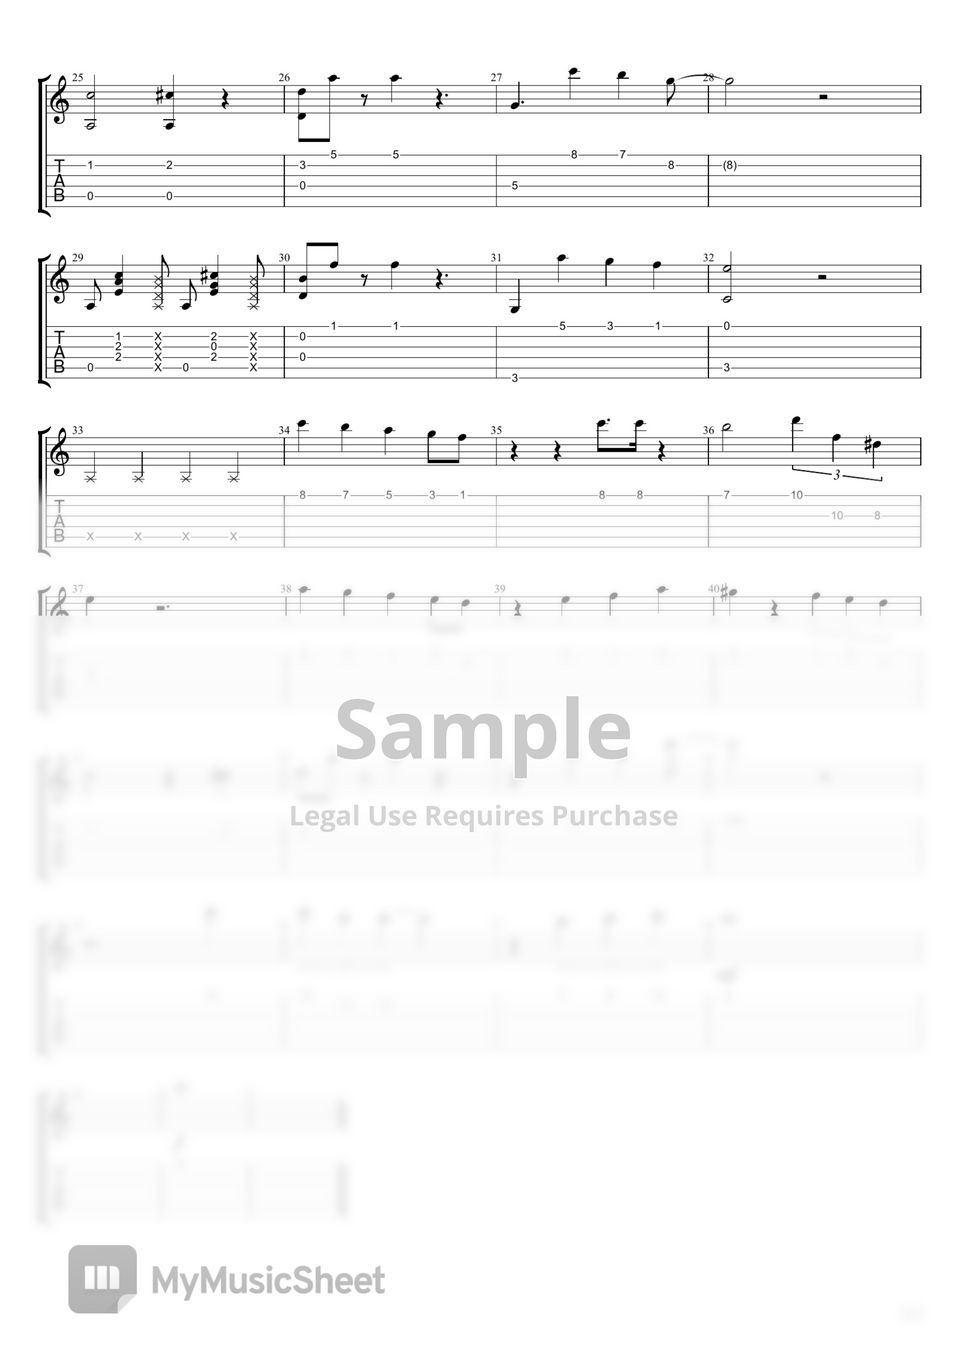 Frank Sinatra - Fly me to the moon (Frank Sinatra) Easy Guitar Duet Tab by corey